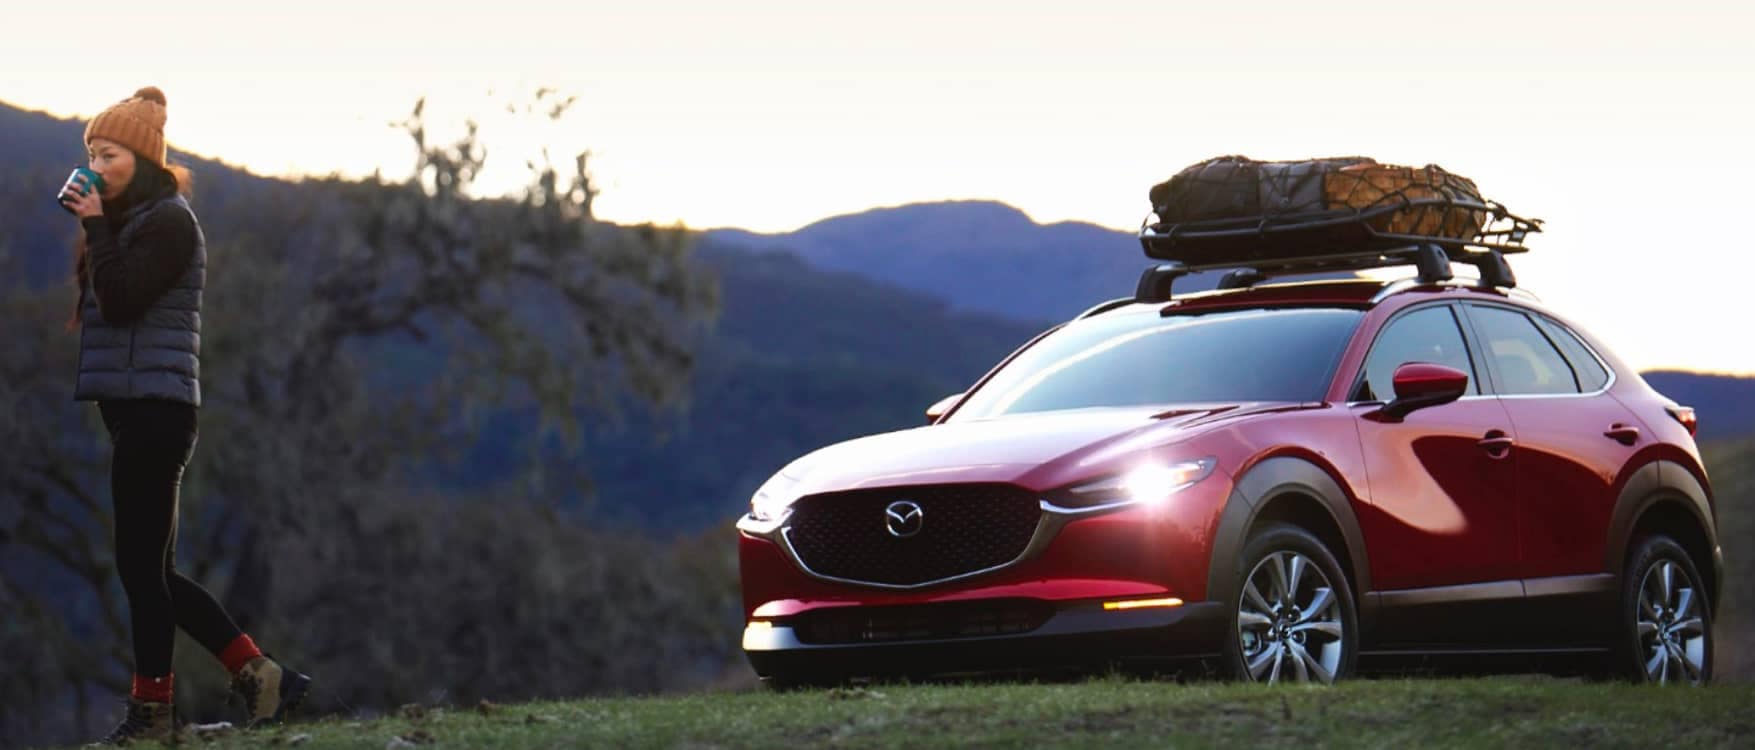 Red Mazda CX-30 parked on a grassy knoll in-front of a mountain range with a woman drinking coffee